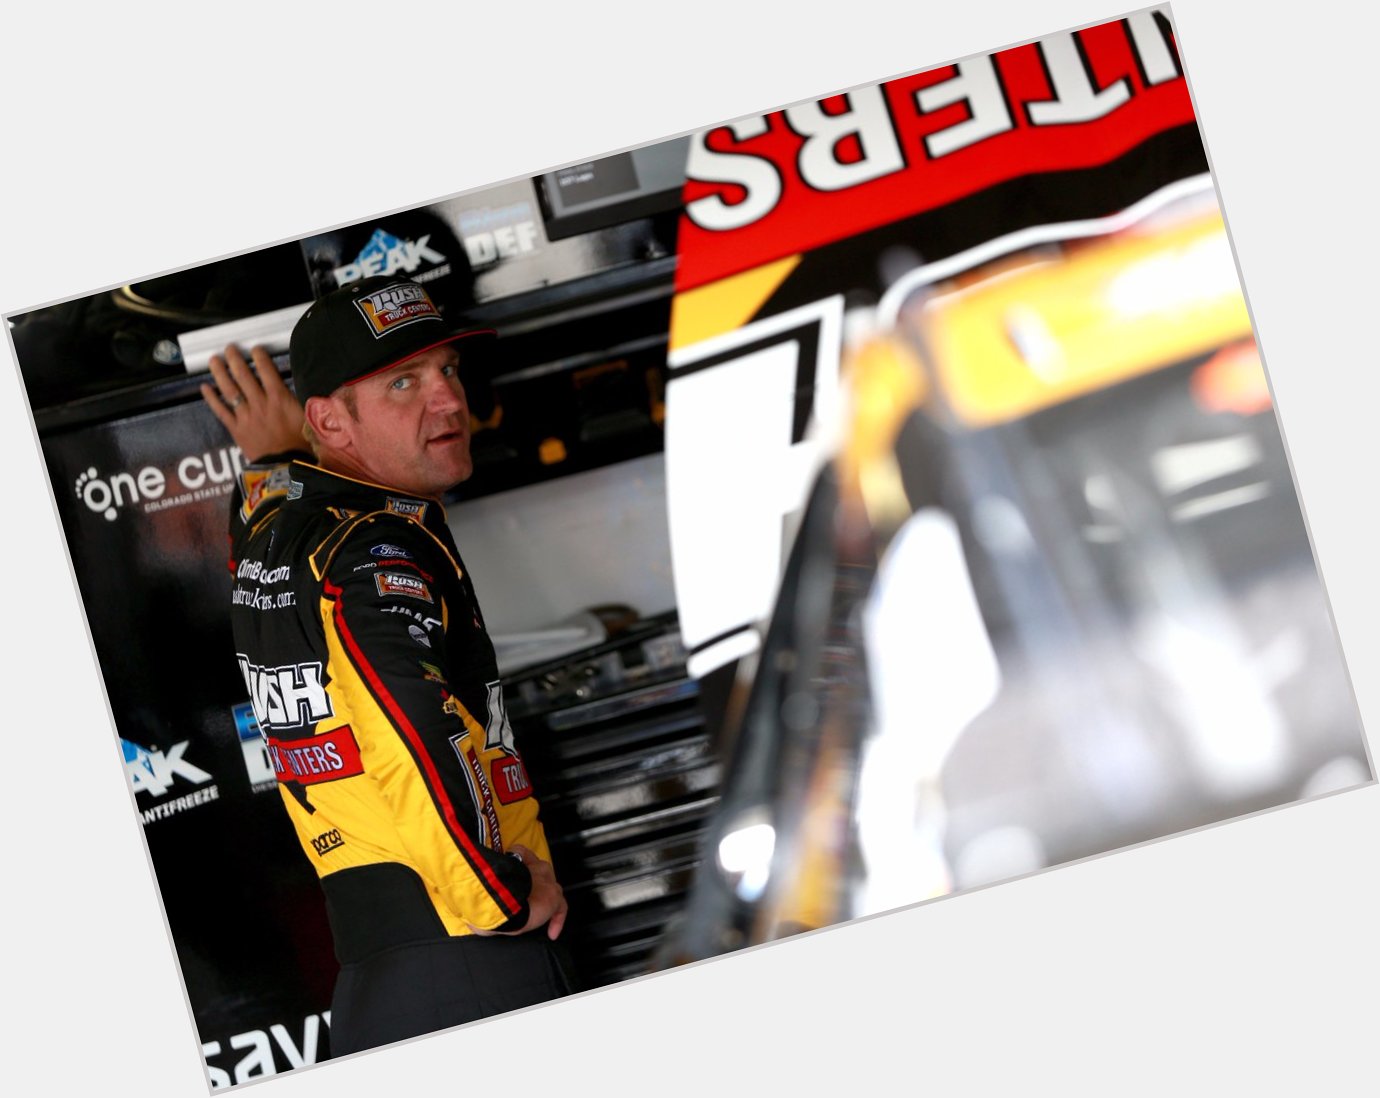 Wishing the happiest of birthdays to Kansas\ own Clint Bowyer!

to wish him a happy birthday! 